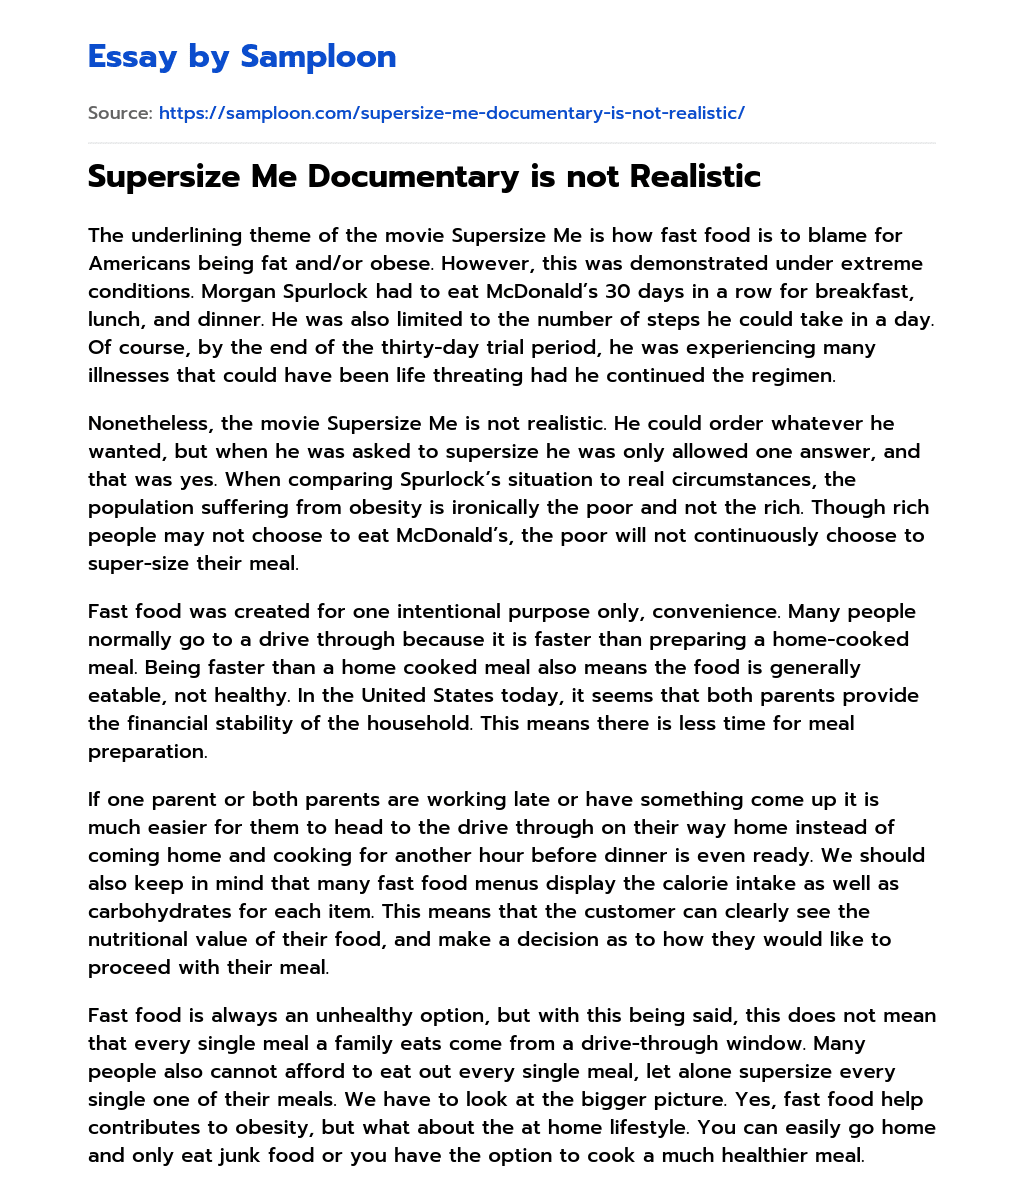 Supersize Me Documentary is not Realistic Review essay